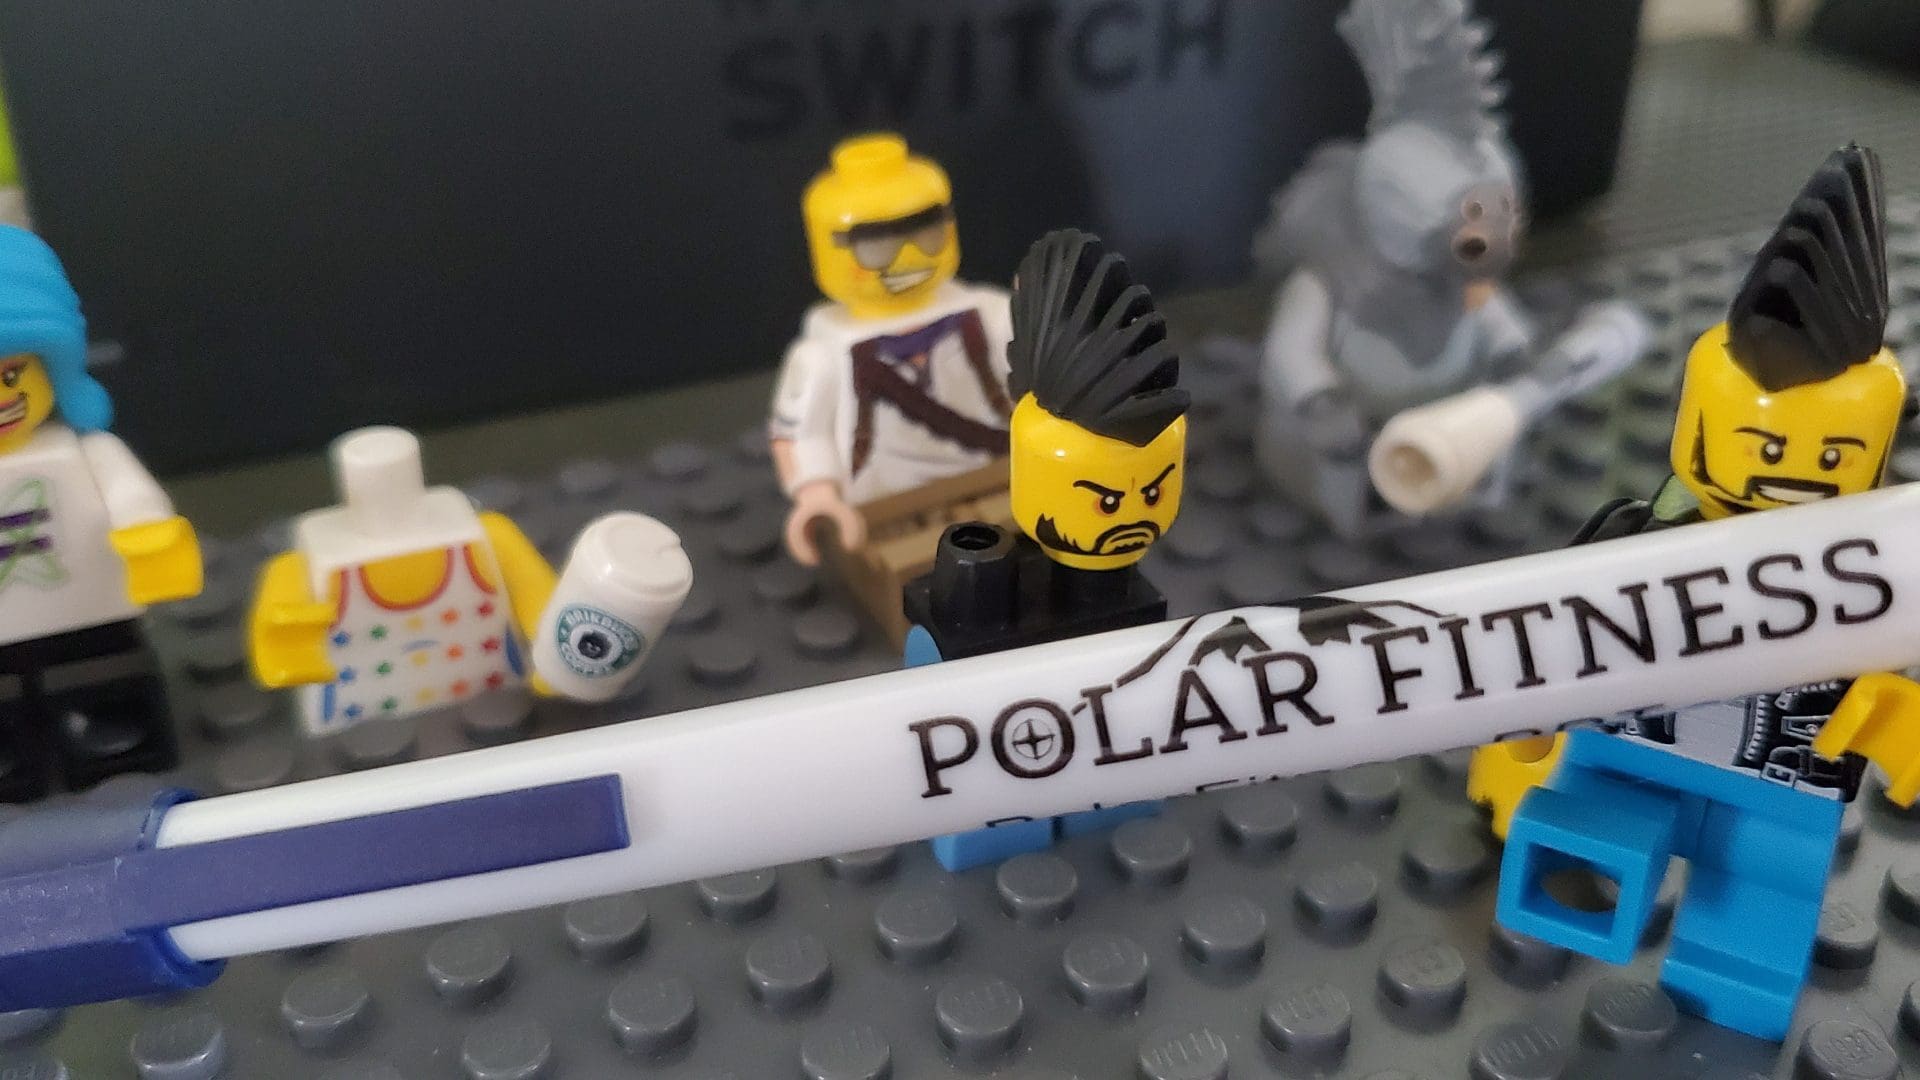 Polar Physical Therapy and Fitness - Belfast Pen Lego 01